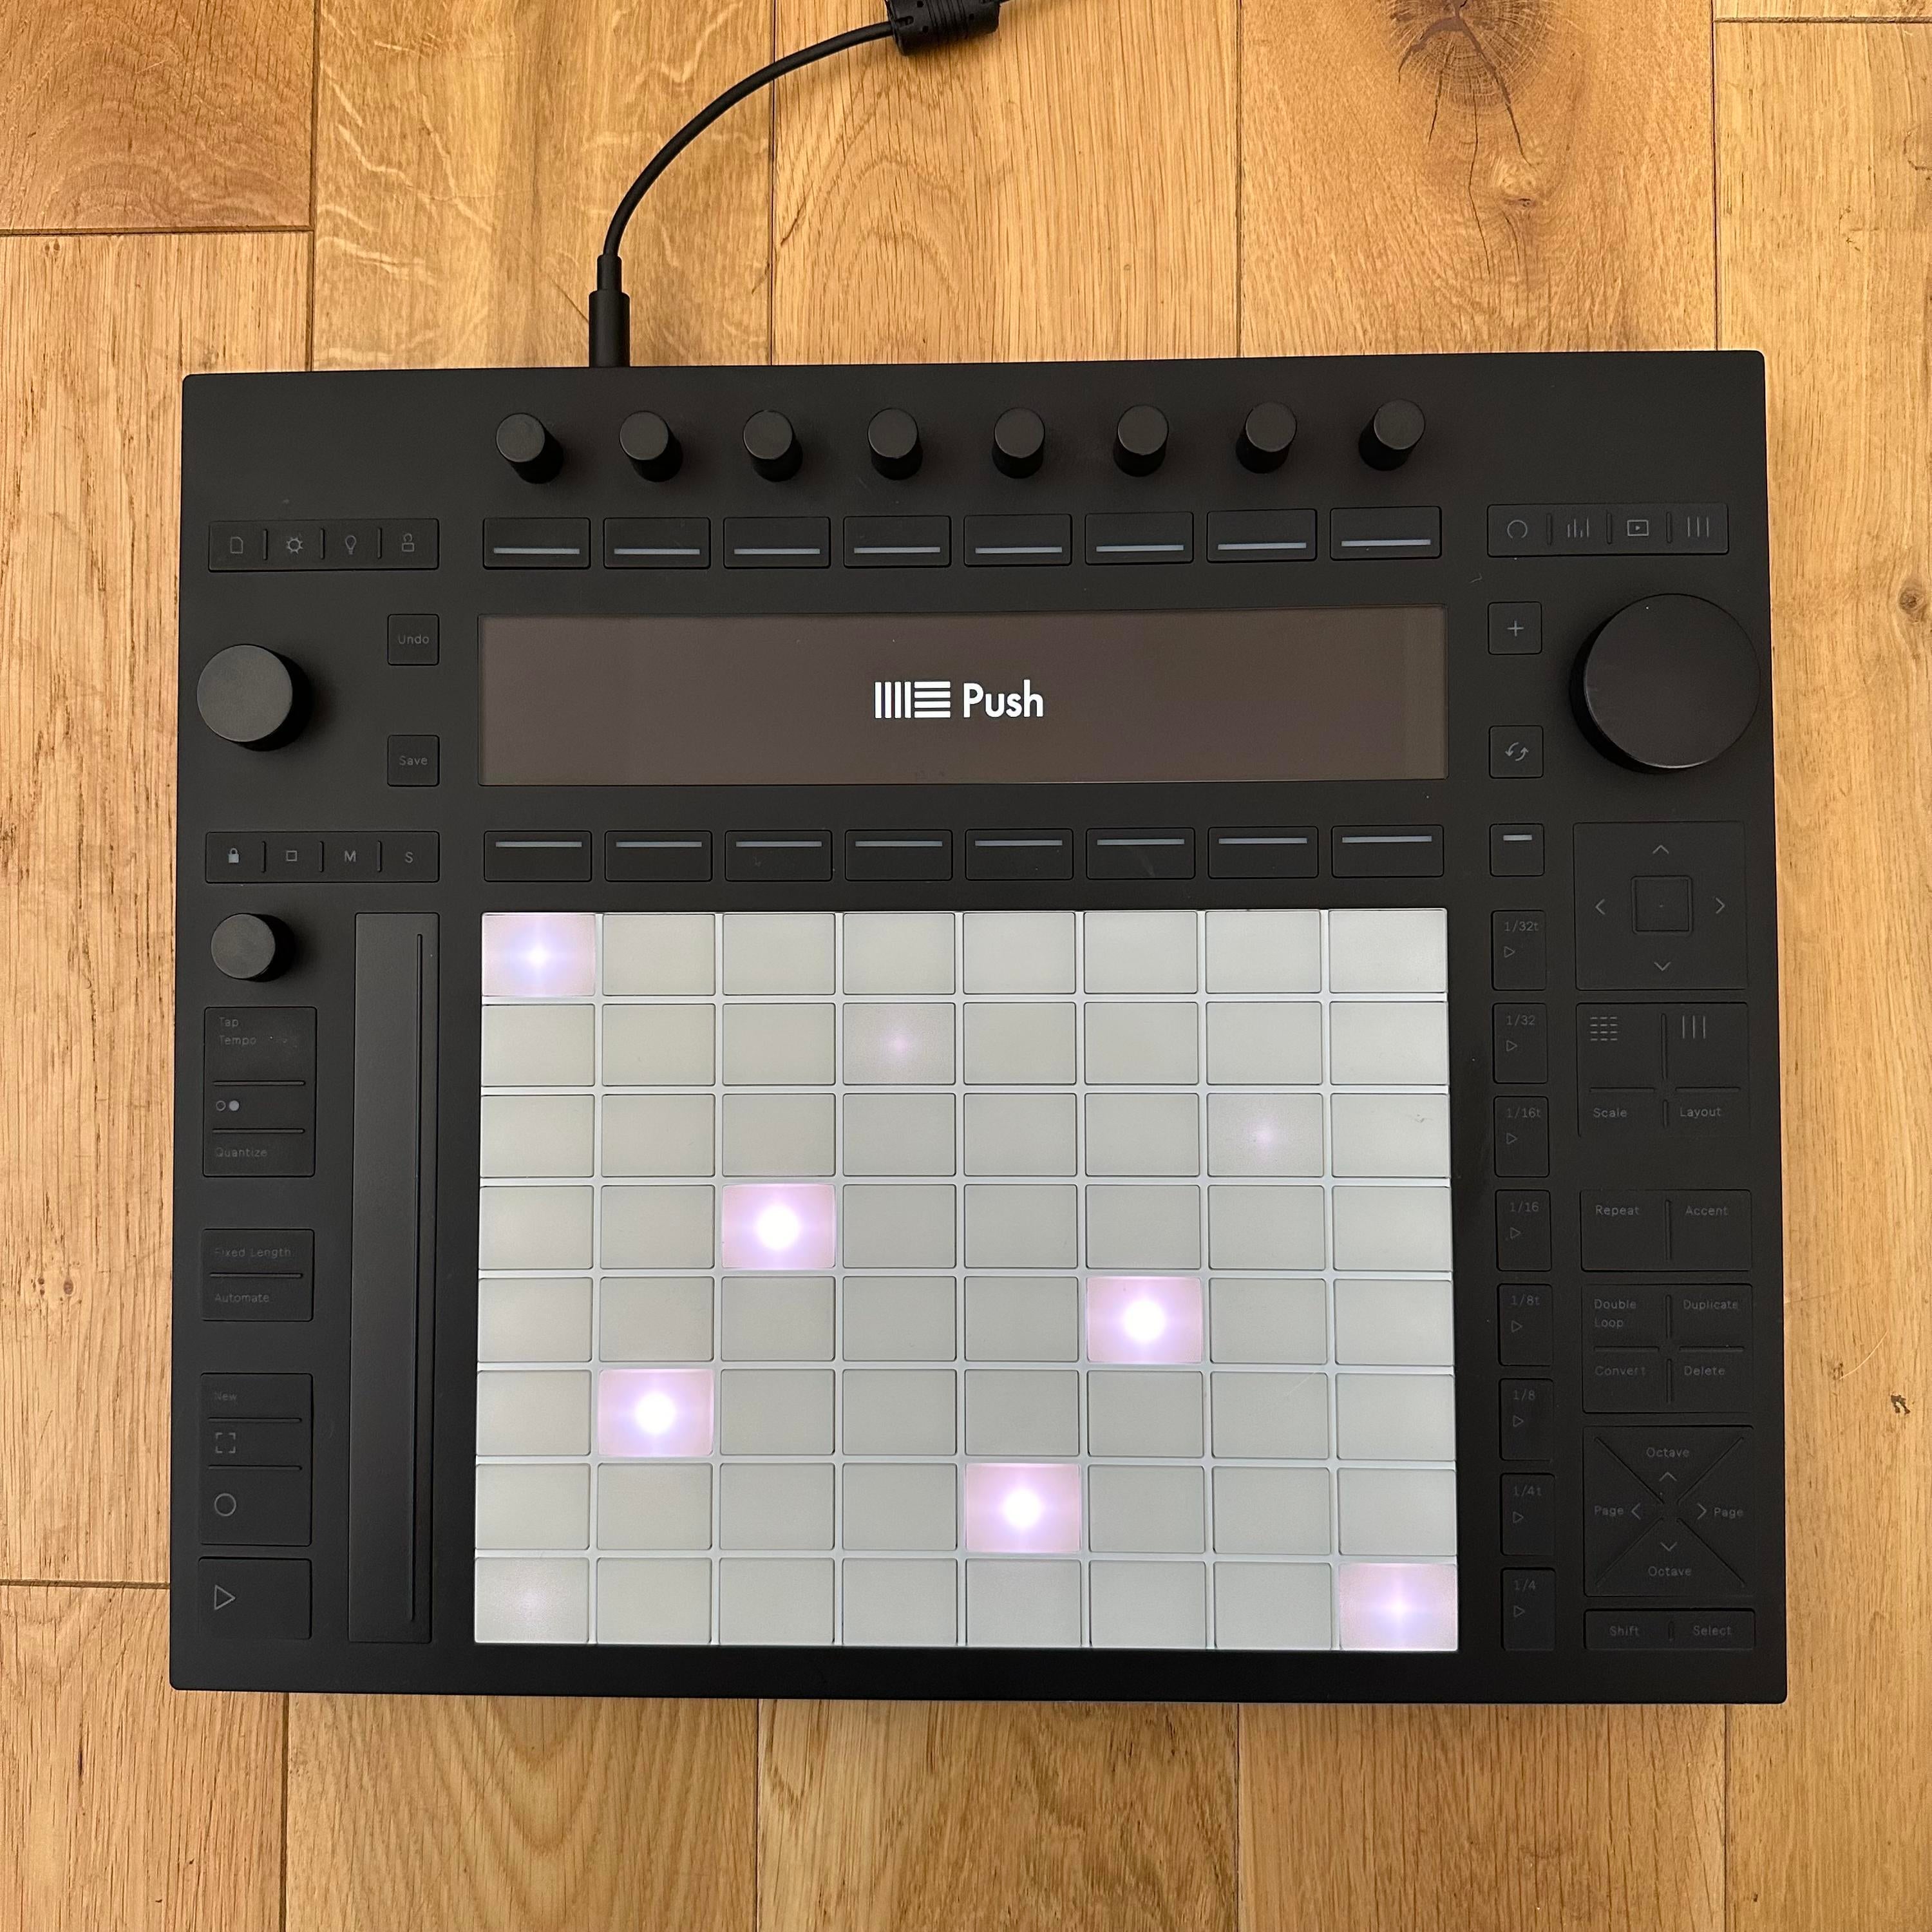 Used Ableton Push 3 Standalone - Sweetwater's Gear Exchange